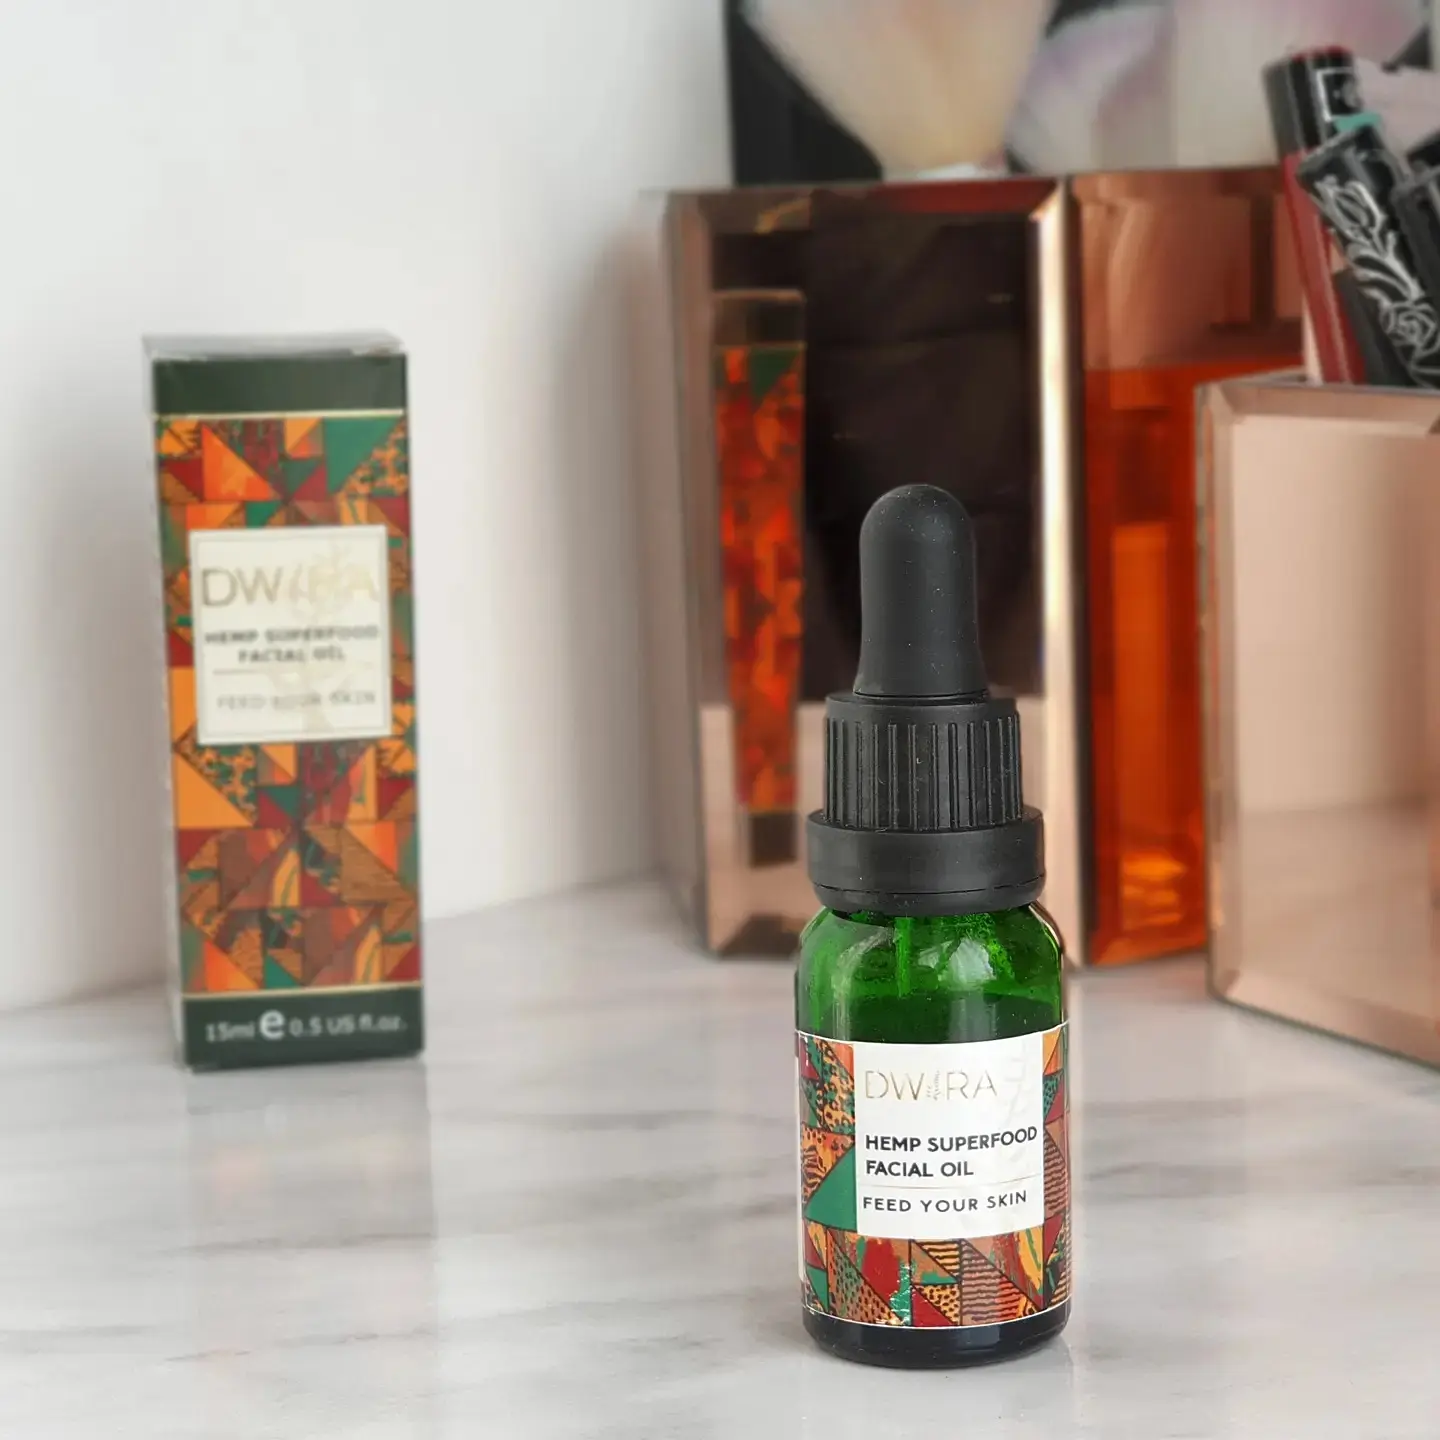 Dwira Hemp Superfood Face Oil Review - Kind Culture review